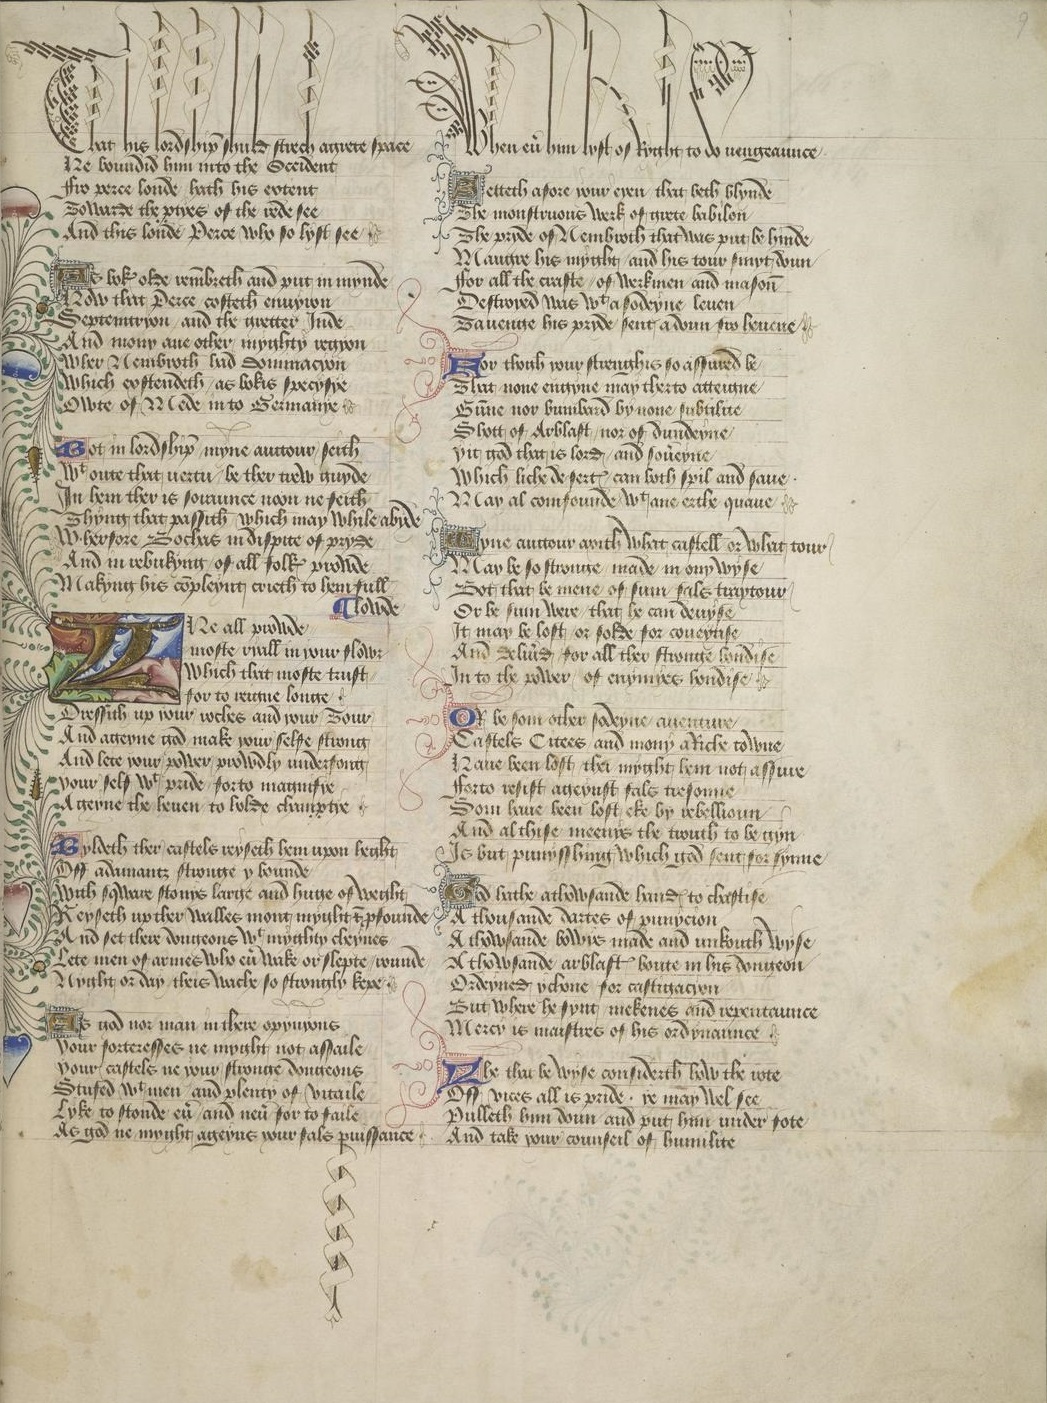 Full-page view of an English illuminated manuscript from the Rosenbach Museum and Library (MS 439.16, fol. 9r)